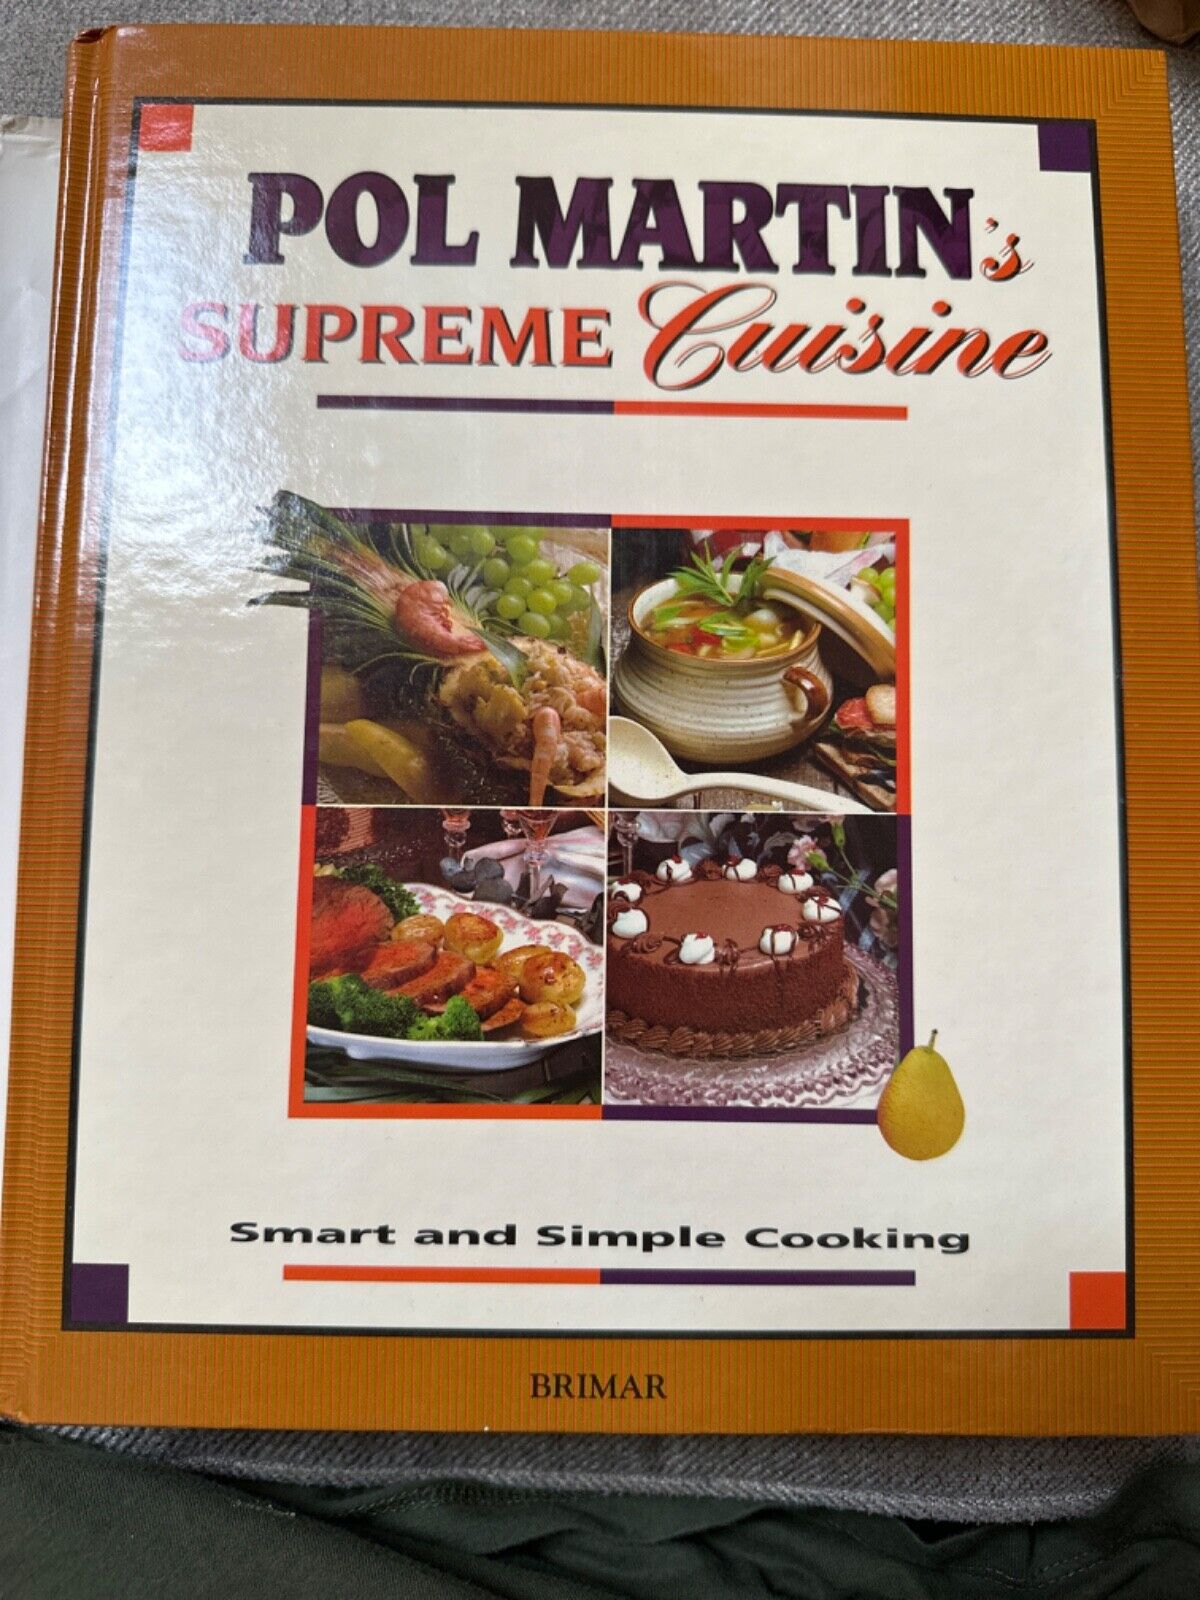 Vintage 1993 Pol Martin Supreme Cuisine Cookbook 511 Pages With Vibrant Pictures